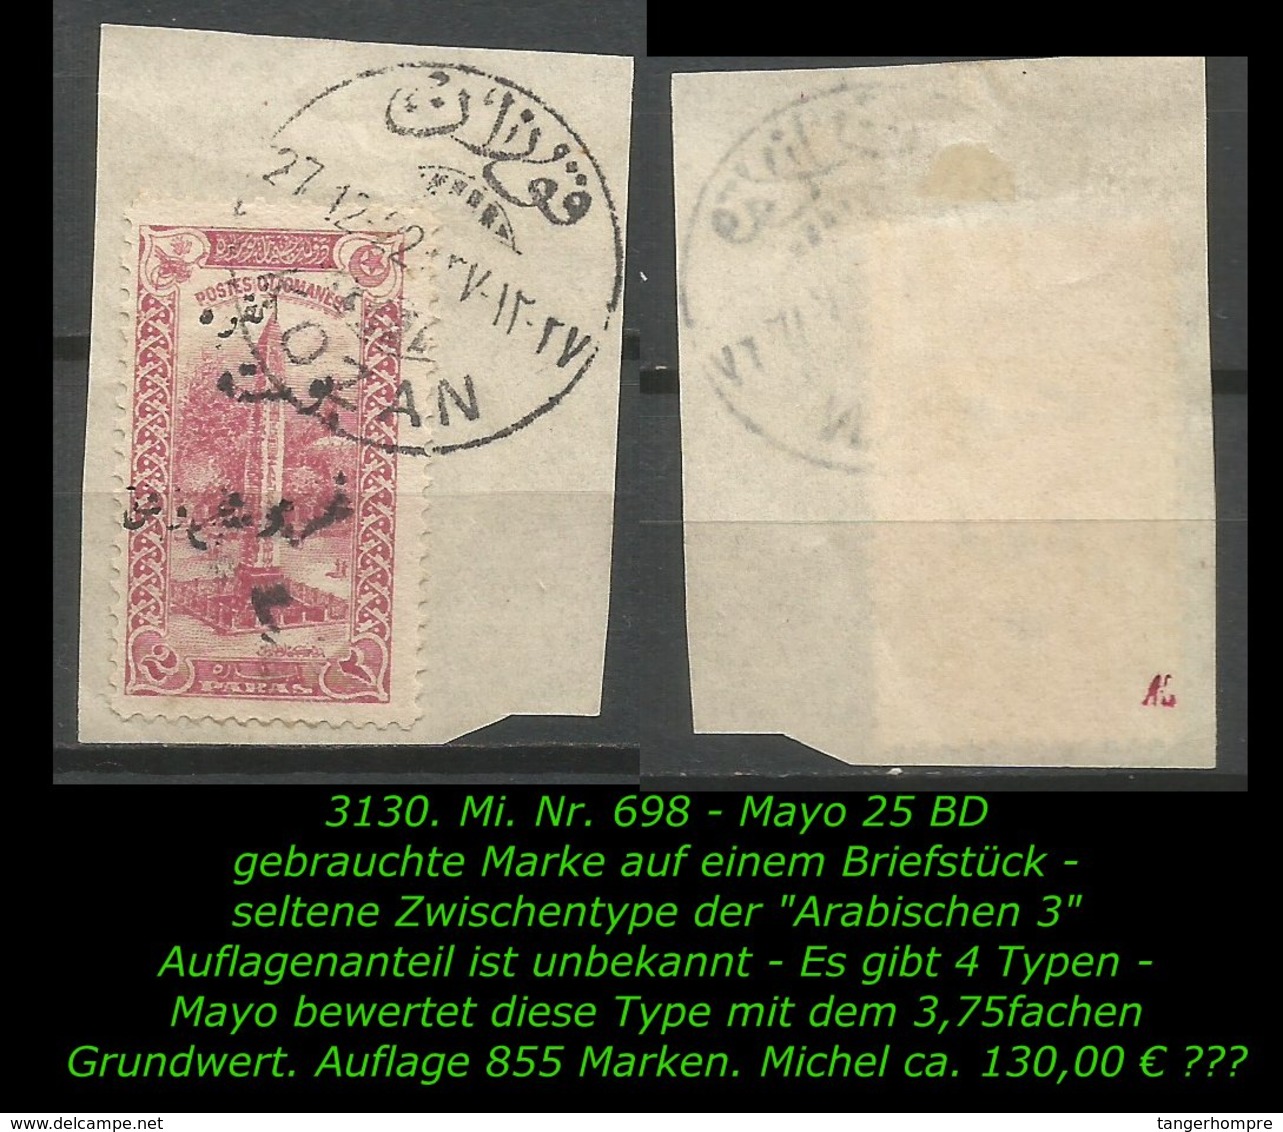 TURKEY ,EARLY OTTOMAN SPECIALIZED FOR SPECIALIST, SEE...Mi. Nr. 698 - Mayo 25 BD -RR- - 1920-21 Kleinasien